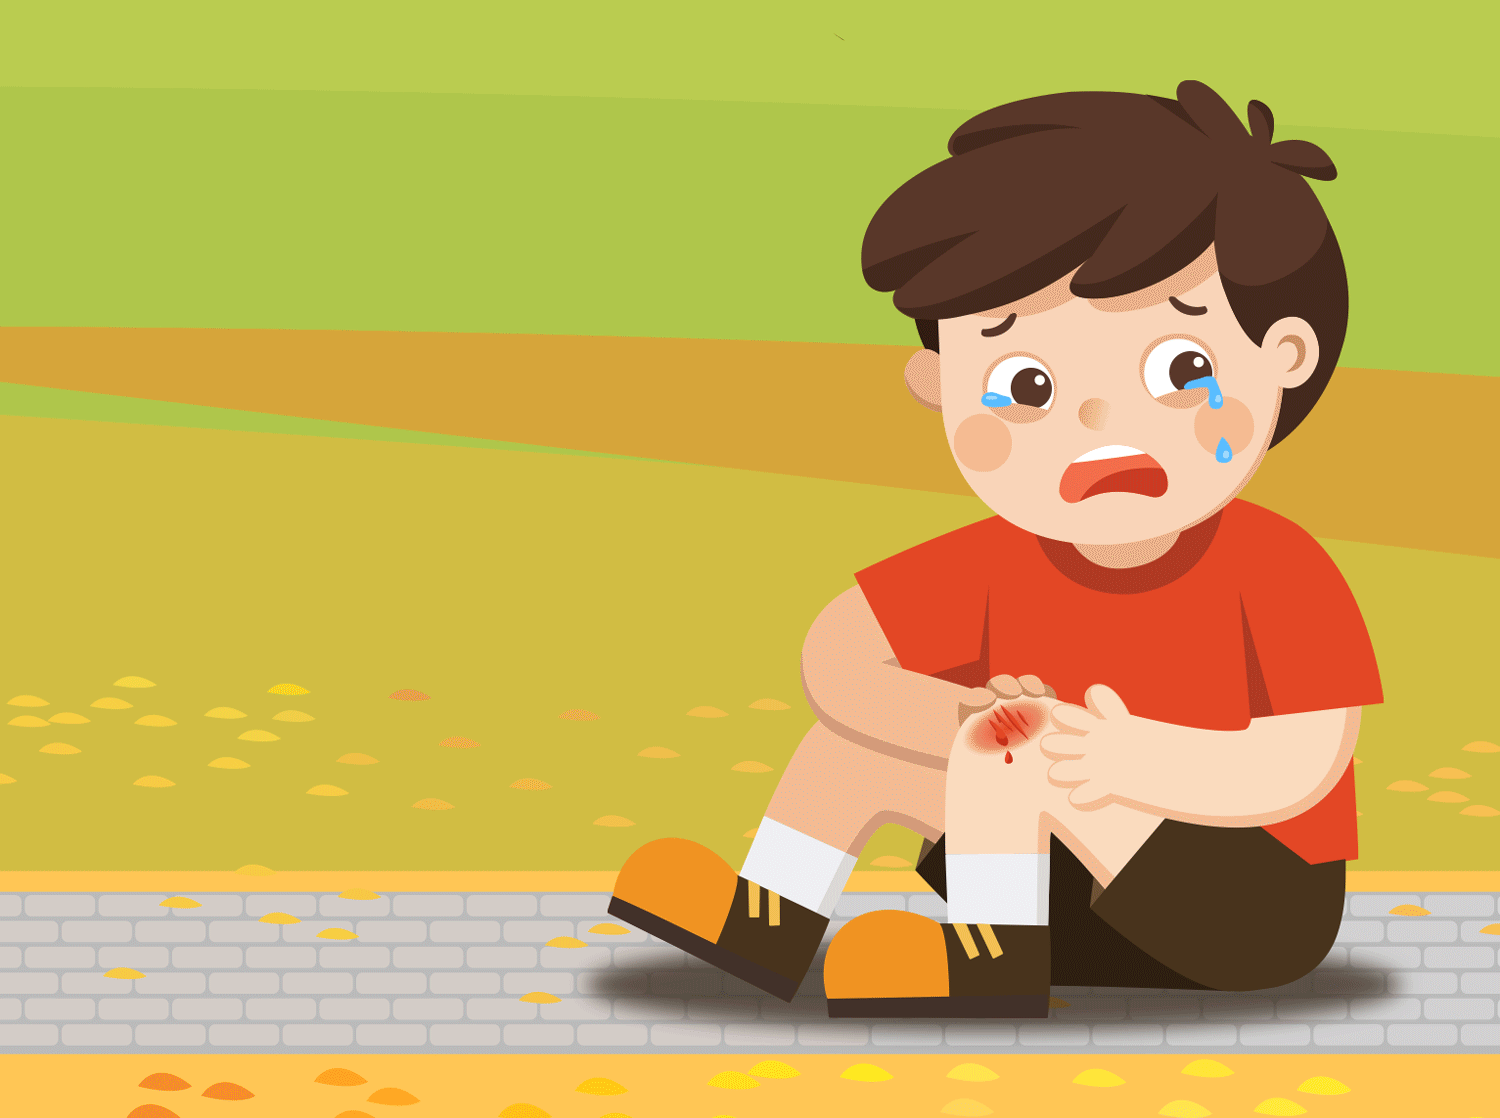 Animation of a spider coming down from its web and offering a bandage to a boy with a scraped knee